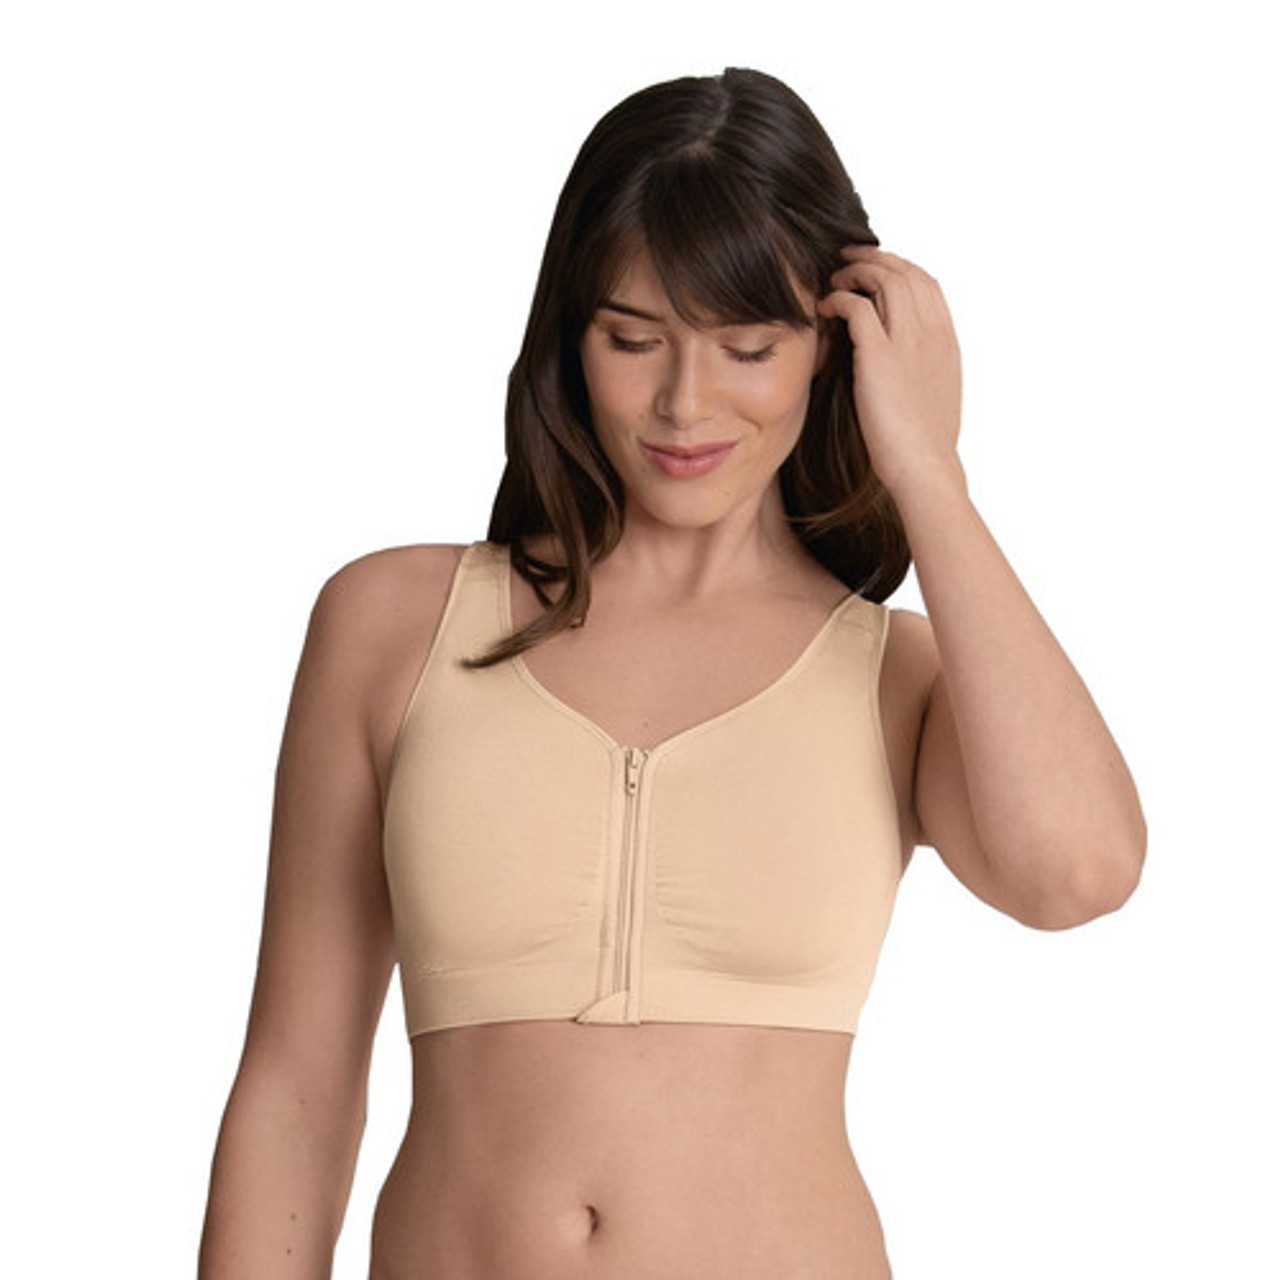 Lily Pad Lingerie - For life and play, Anita sports bras have you covered.  With refined tech features, smart design and the right details in the right  places - this Performance bra